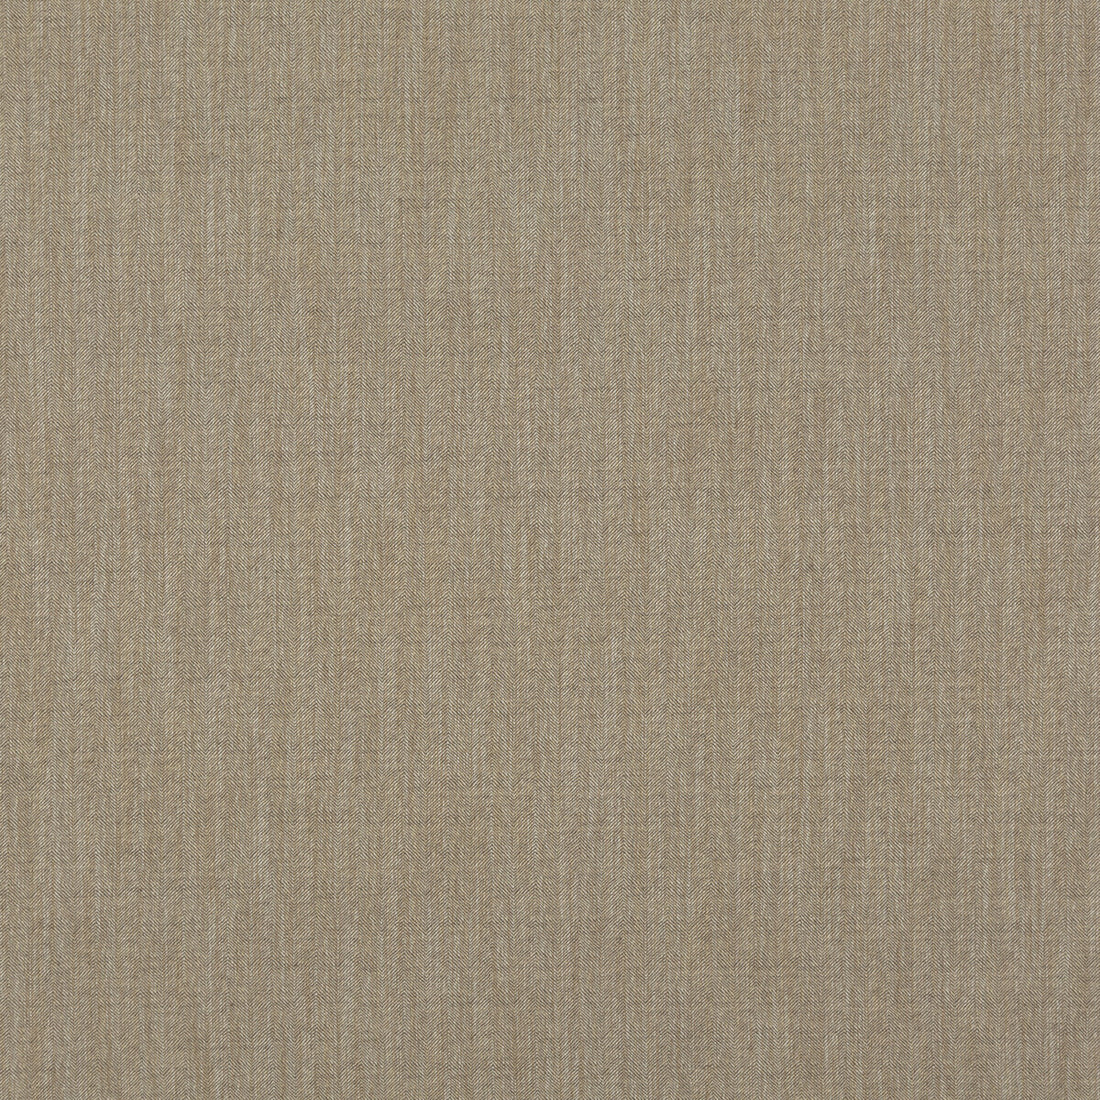 Canyon fabric in bronze color - pattern BF10680.850.0 - by G P &amp; J Baker in the Essential Colours collection